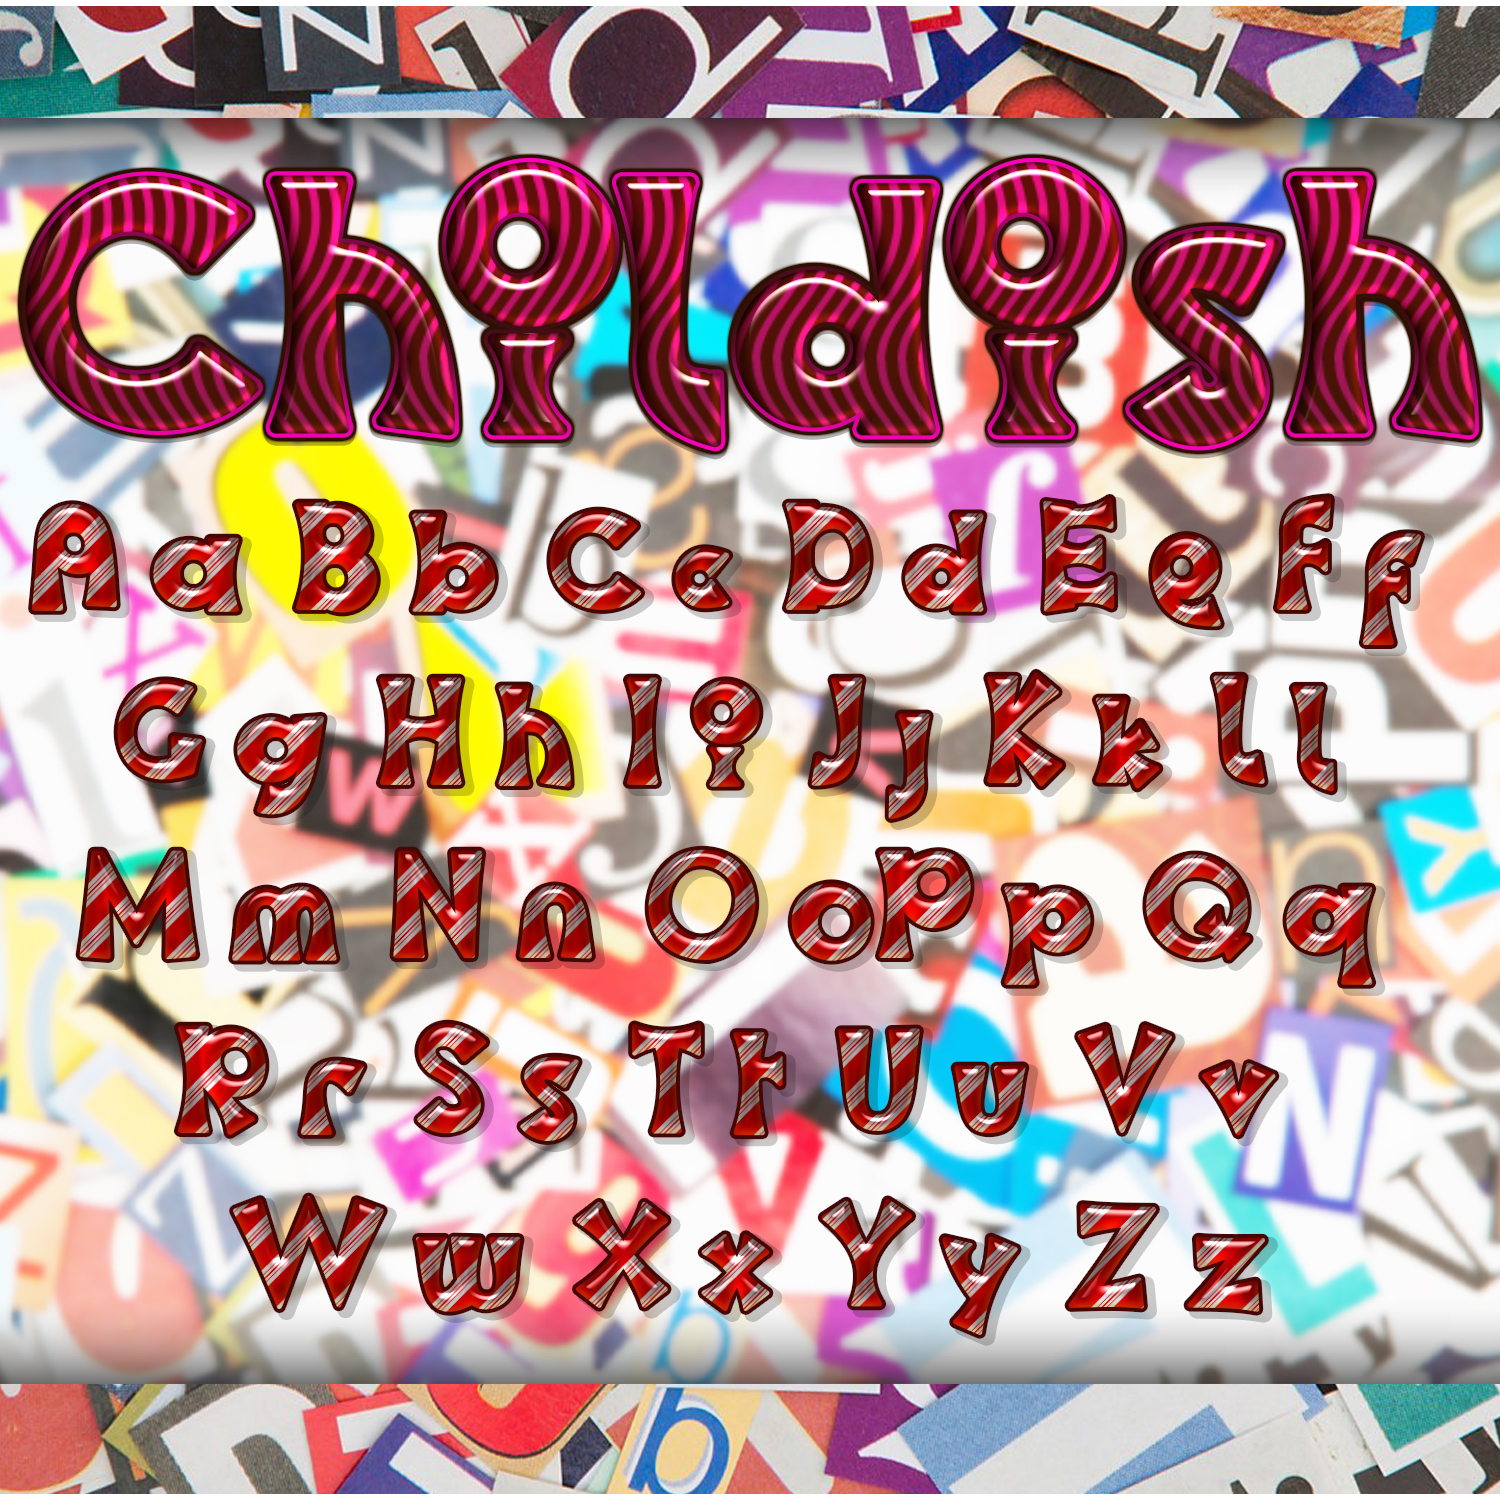 Alphabet preview on images using the font.